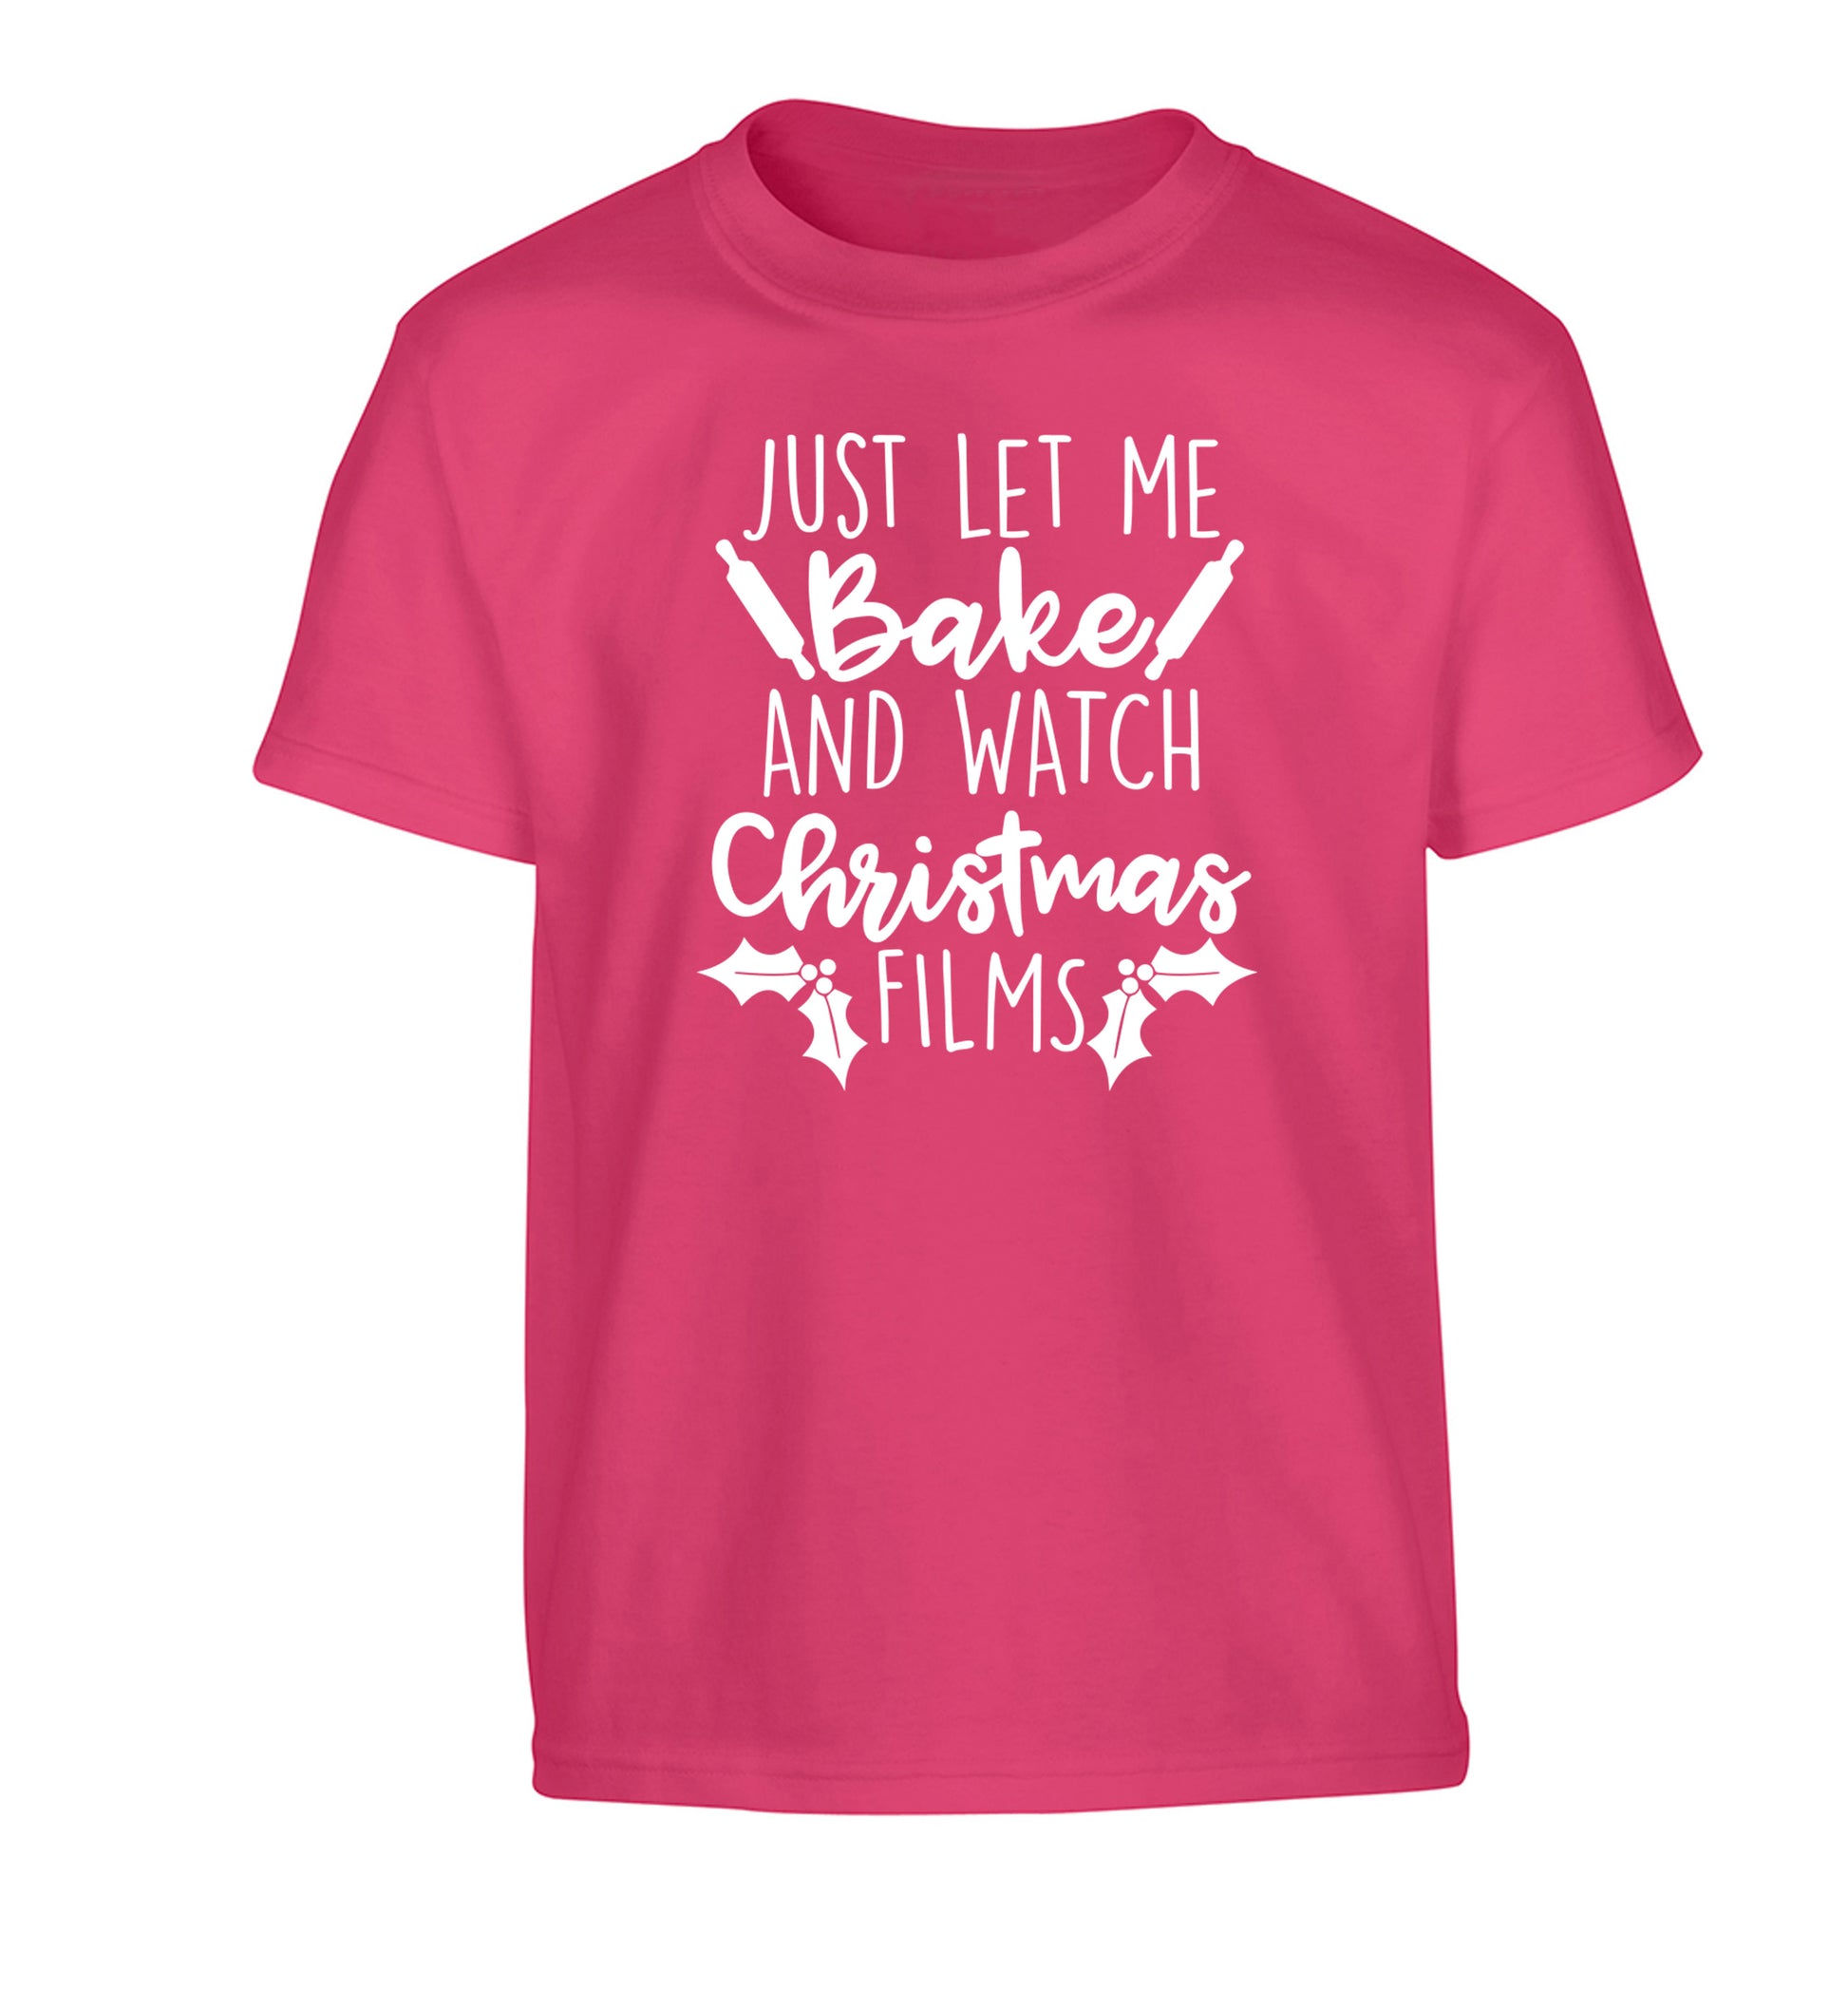 Just let me bake and watch Christmas films Children's pink Tshirt 12-14 Years